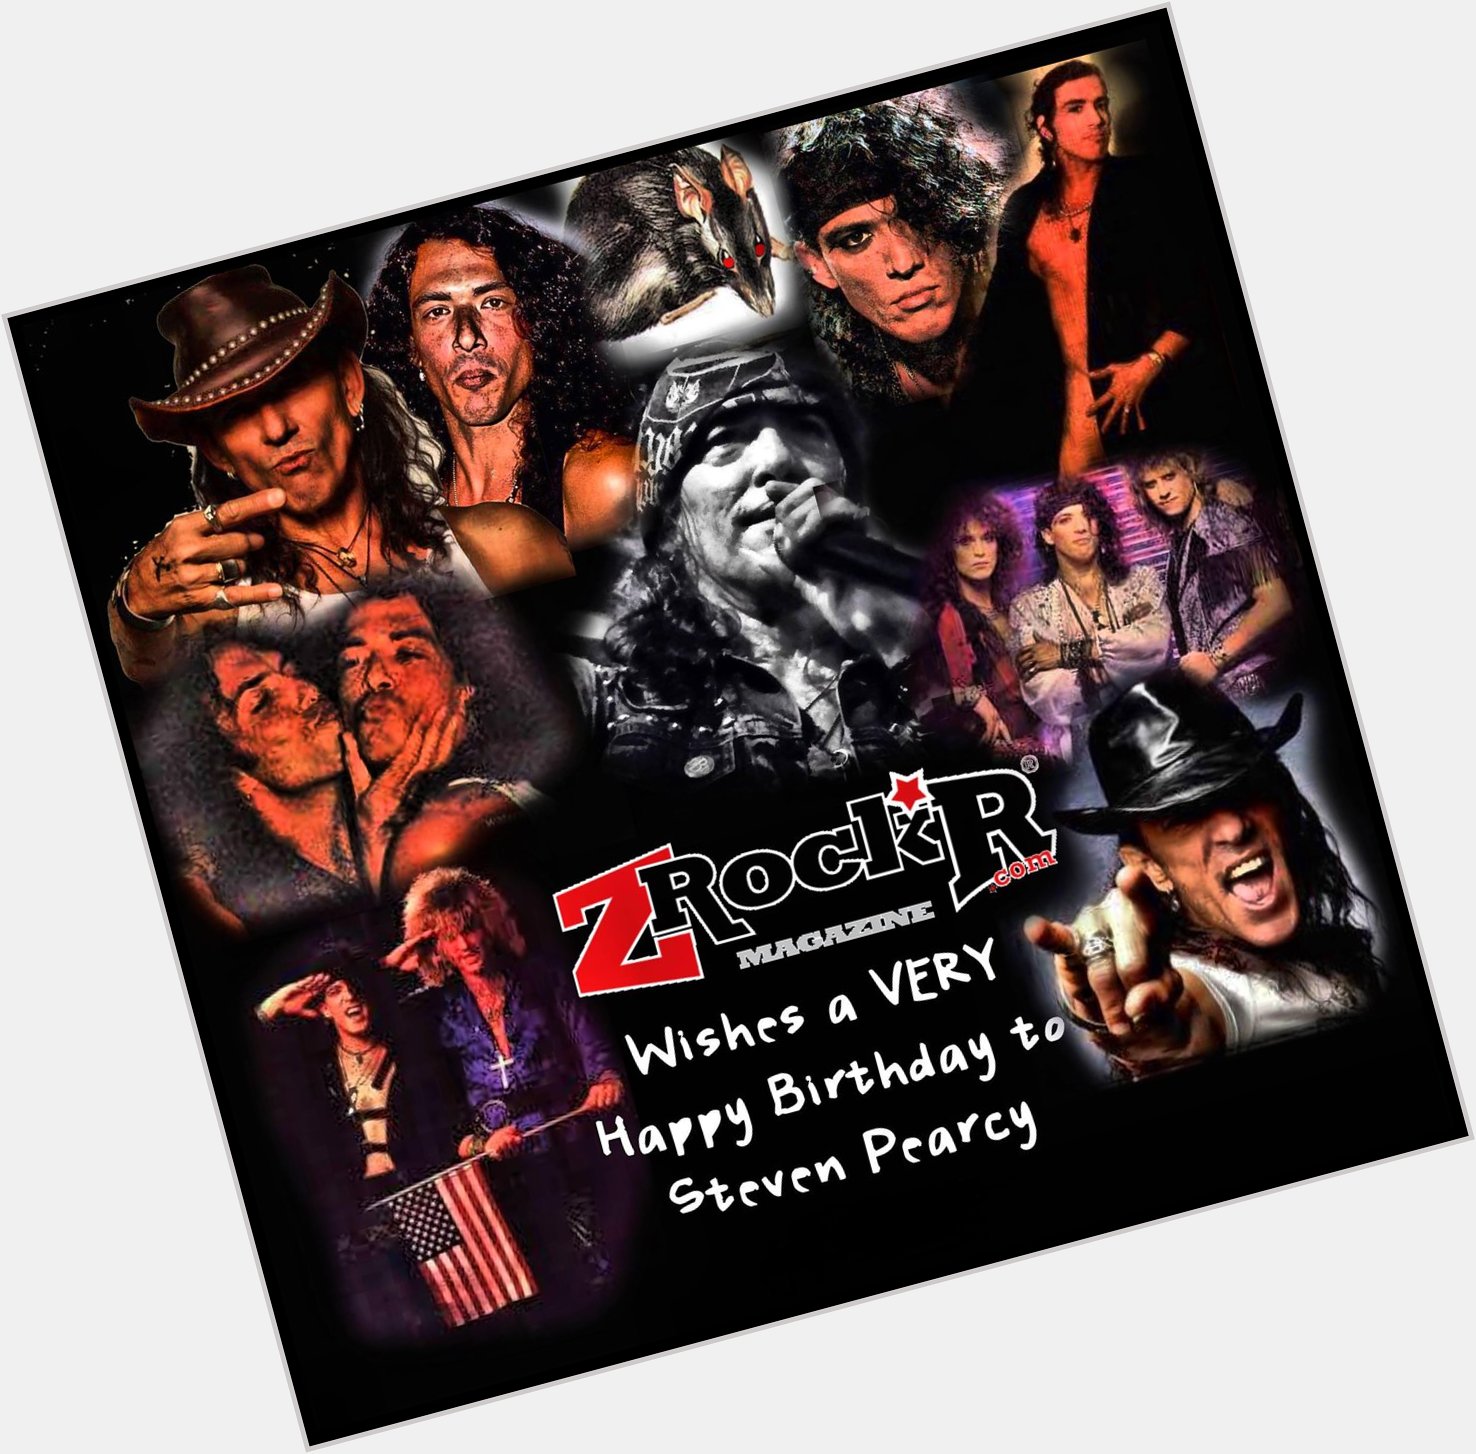 A Very Happy Birthday to Stephen Pearcy From All Of Us At ZRock\R!   